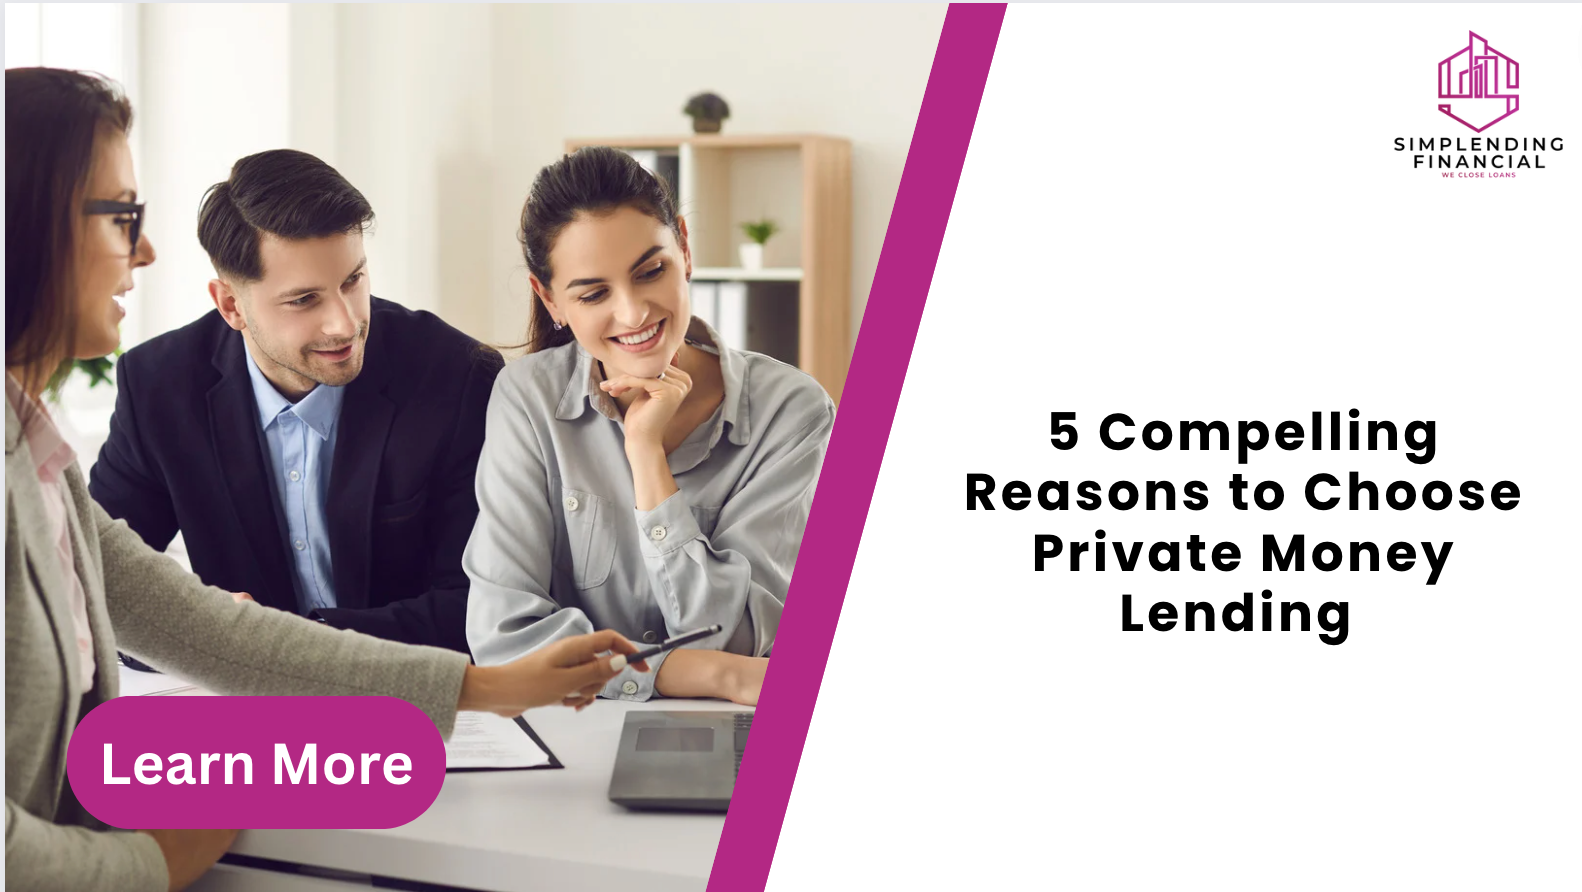 5 Compelling Reasons to Choose Private Money Lending